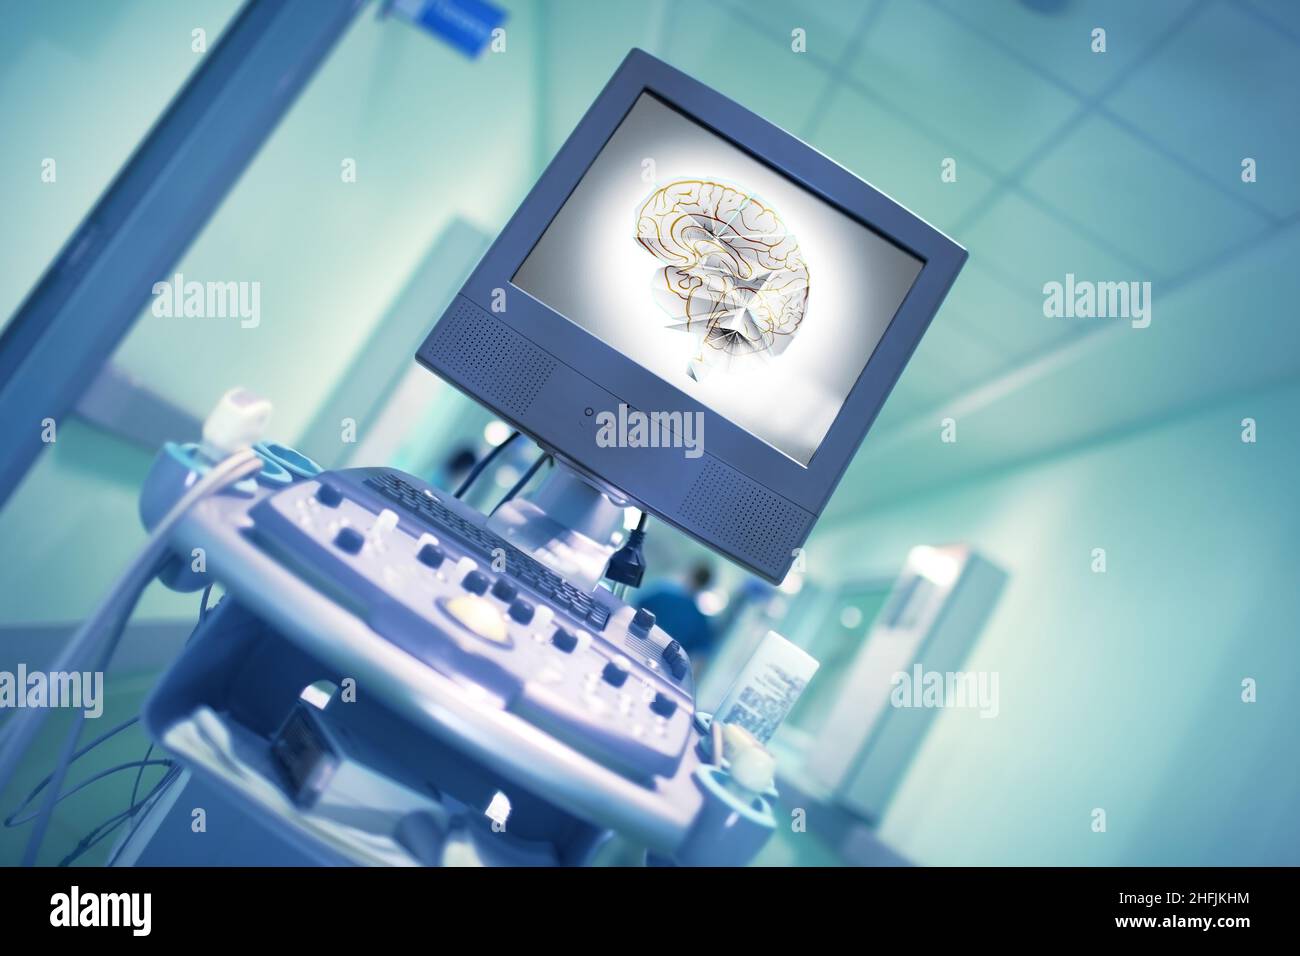 Human brain image on the display of medical equipment in the hospital corridor with blurred in motion silhouette of walking doctor. Stock Photo